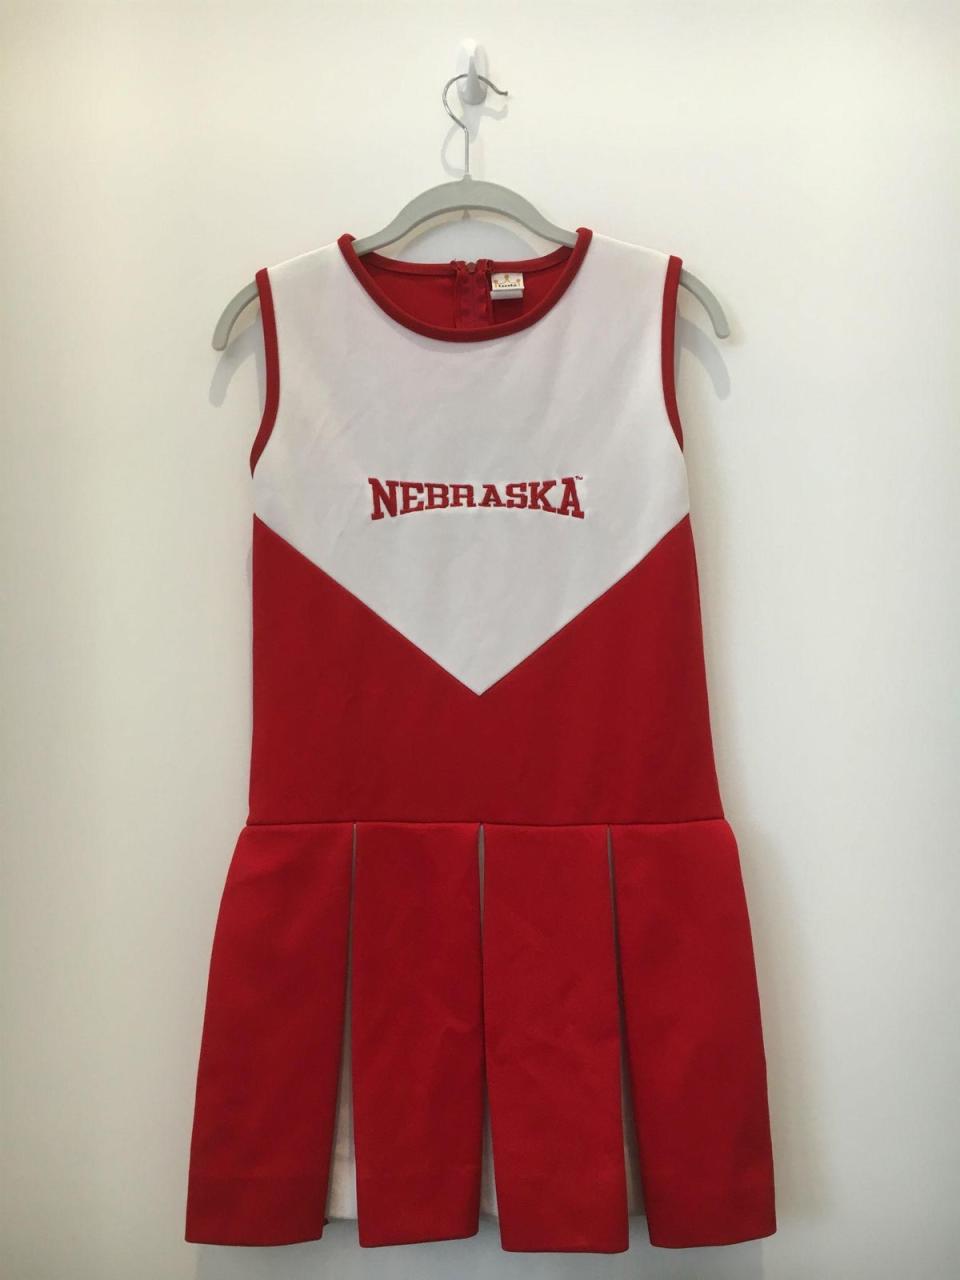 A vintage cheerleadering uniform, bought as a turn-on for its owner’s boyfriend, who was a fan of the Cornhuskers, the University of Nebraska’s football team. “The night he ended things I almost put the uniform on in anticipation of him getting home,” she writes, “but thankfully opted for a flannel PJ set instead.” ((Tim Walker))